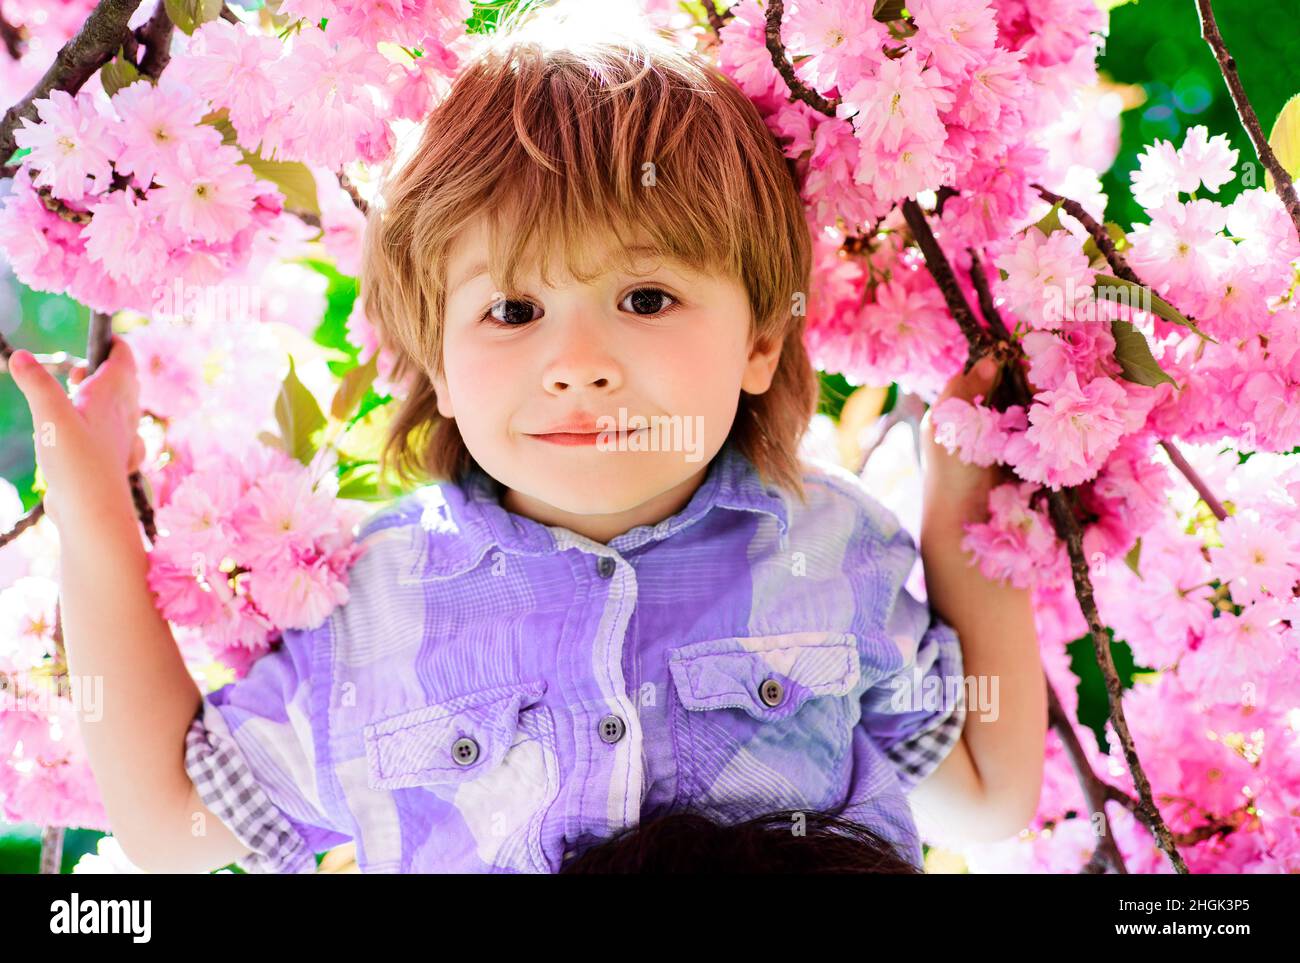 Happy child in sakura park. Little kid smiling among blooming cherry tree with pink flowers. Spring. Stock Photo